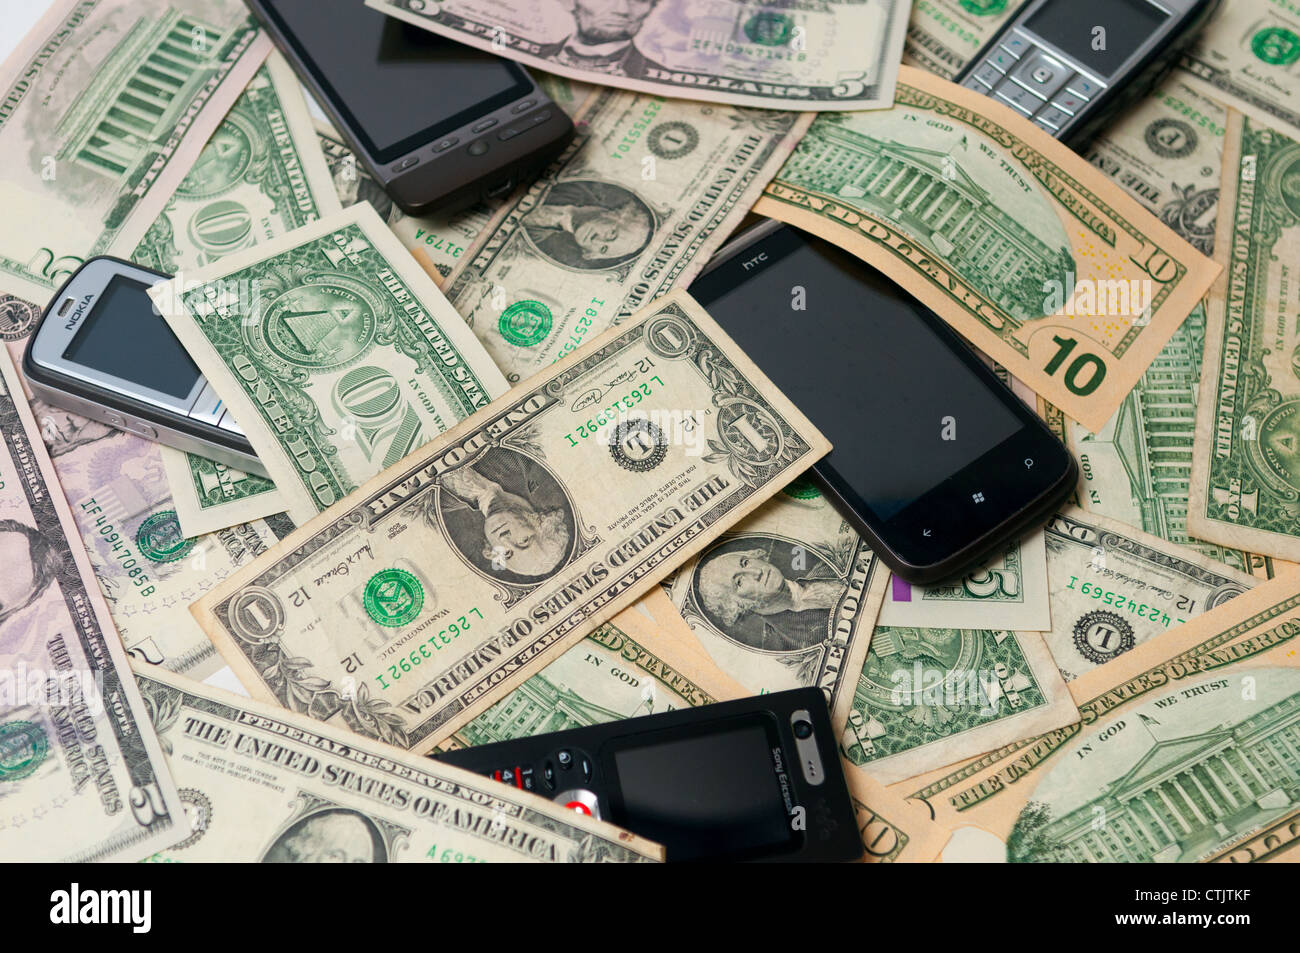 Mobile Phones on a pile of money Stock Photo